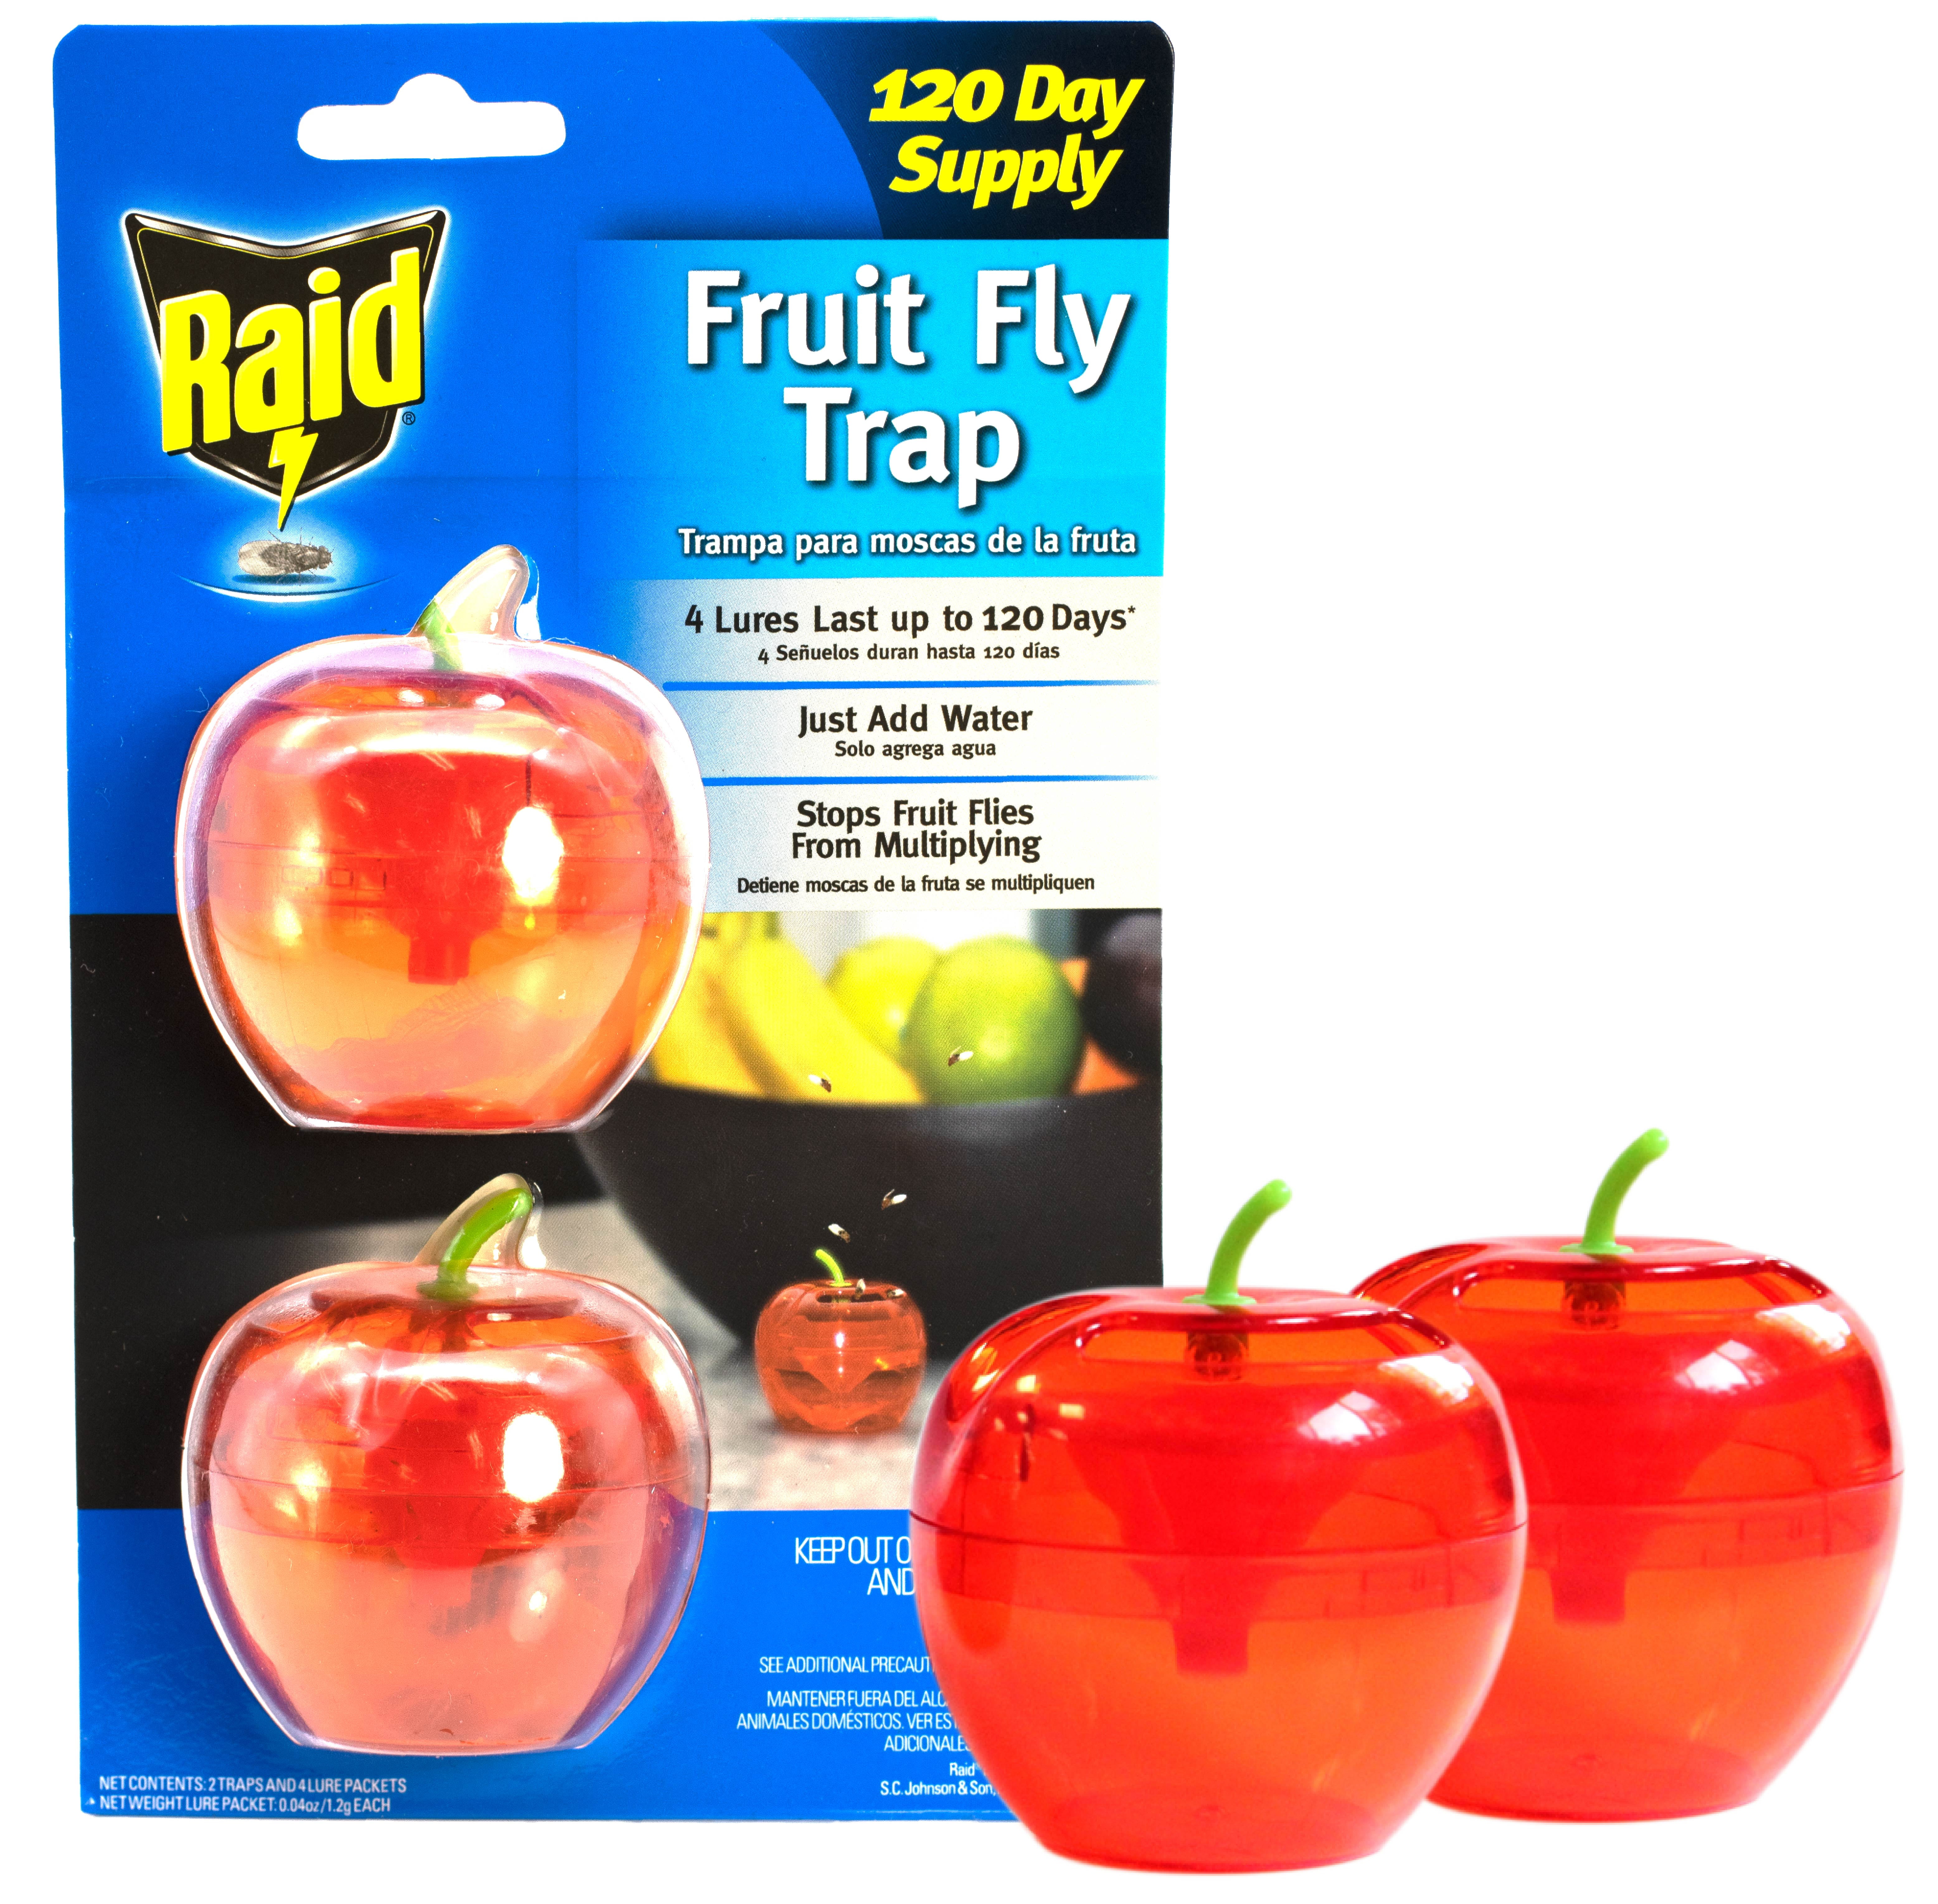  Raid Fruit Fly Trap Bundle, Set of 3 2-Pack Apple Fruit Fly  Catcher Indoor Trap, 360-Day Supply of Fruit Fly Traps for Kitchen & Dining  Areas, Reusable Gnat Traps w/Food-Based